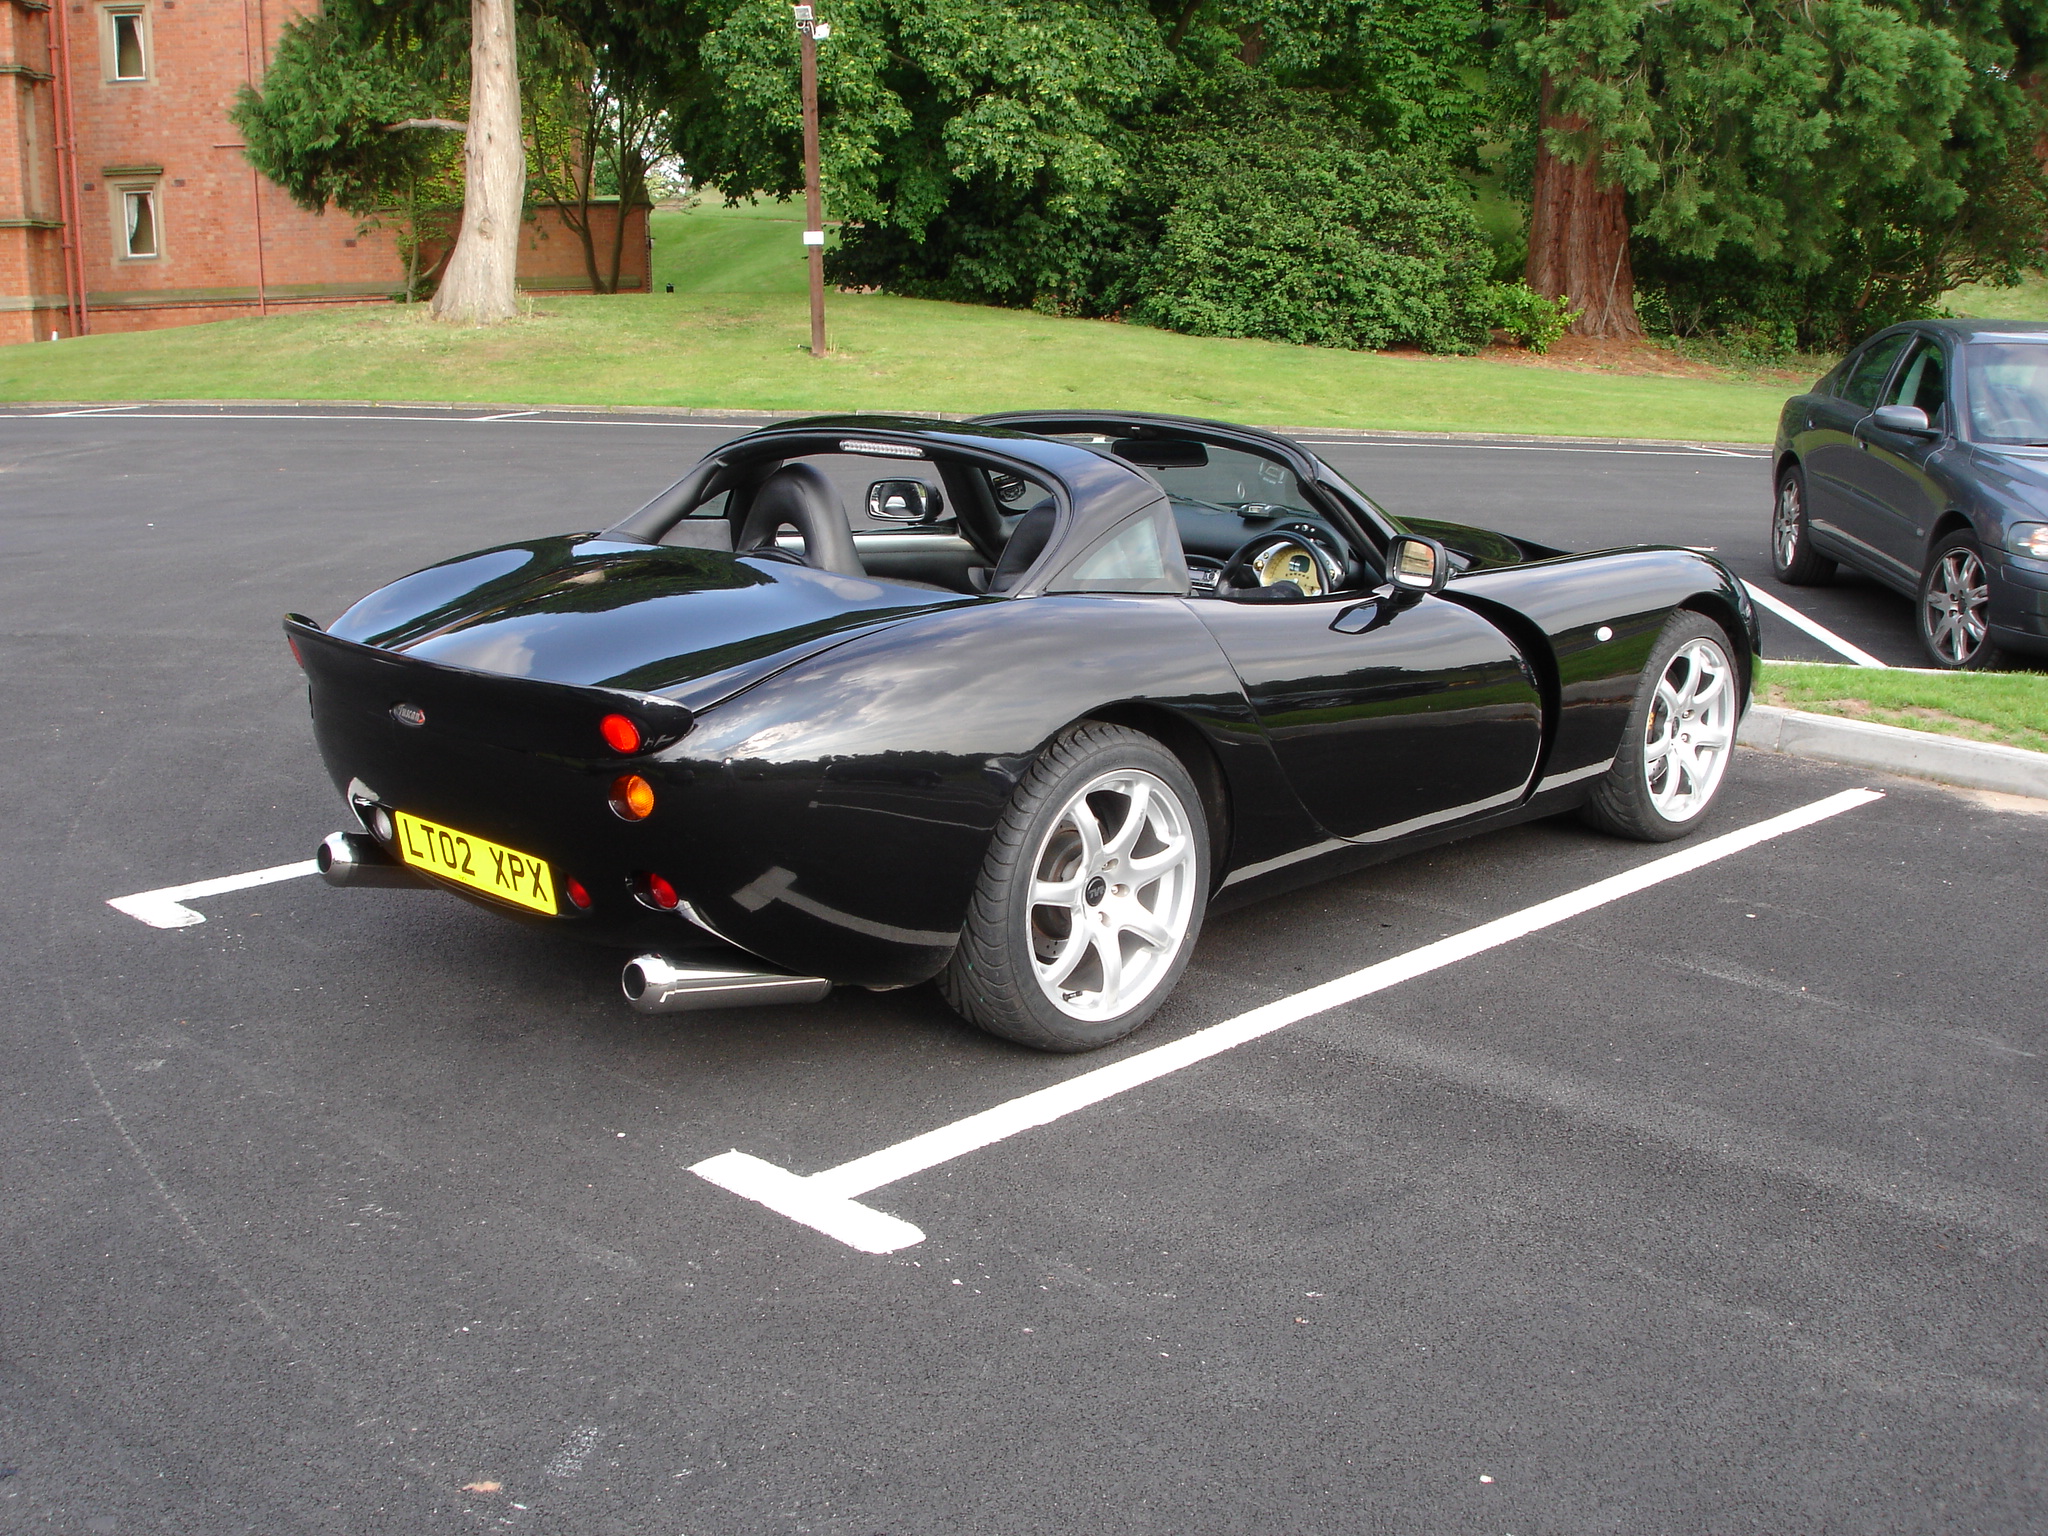 Black Tusc, LT02 *** spotted in Studley - Page 1 - Spotted TVRs - PistonHeads